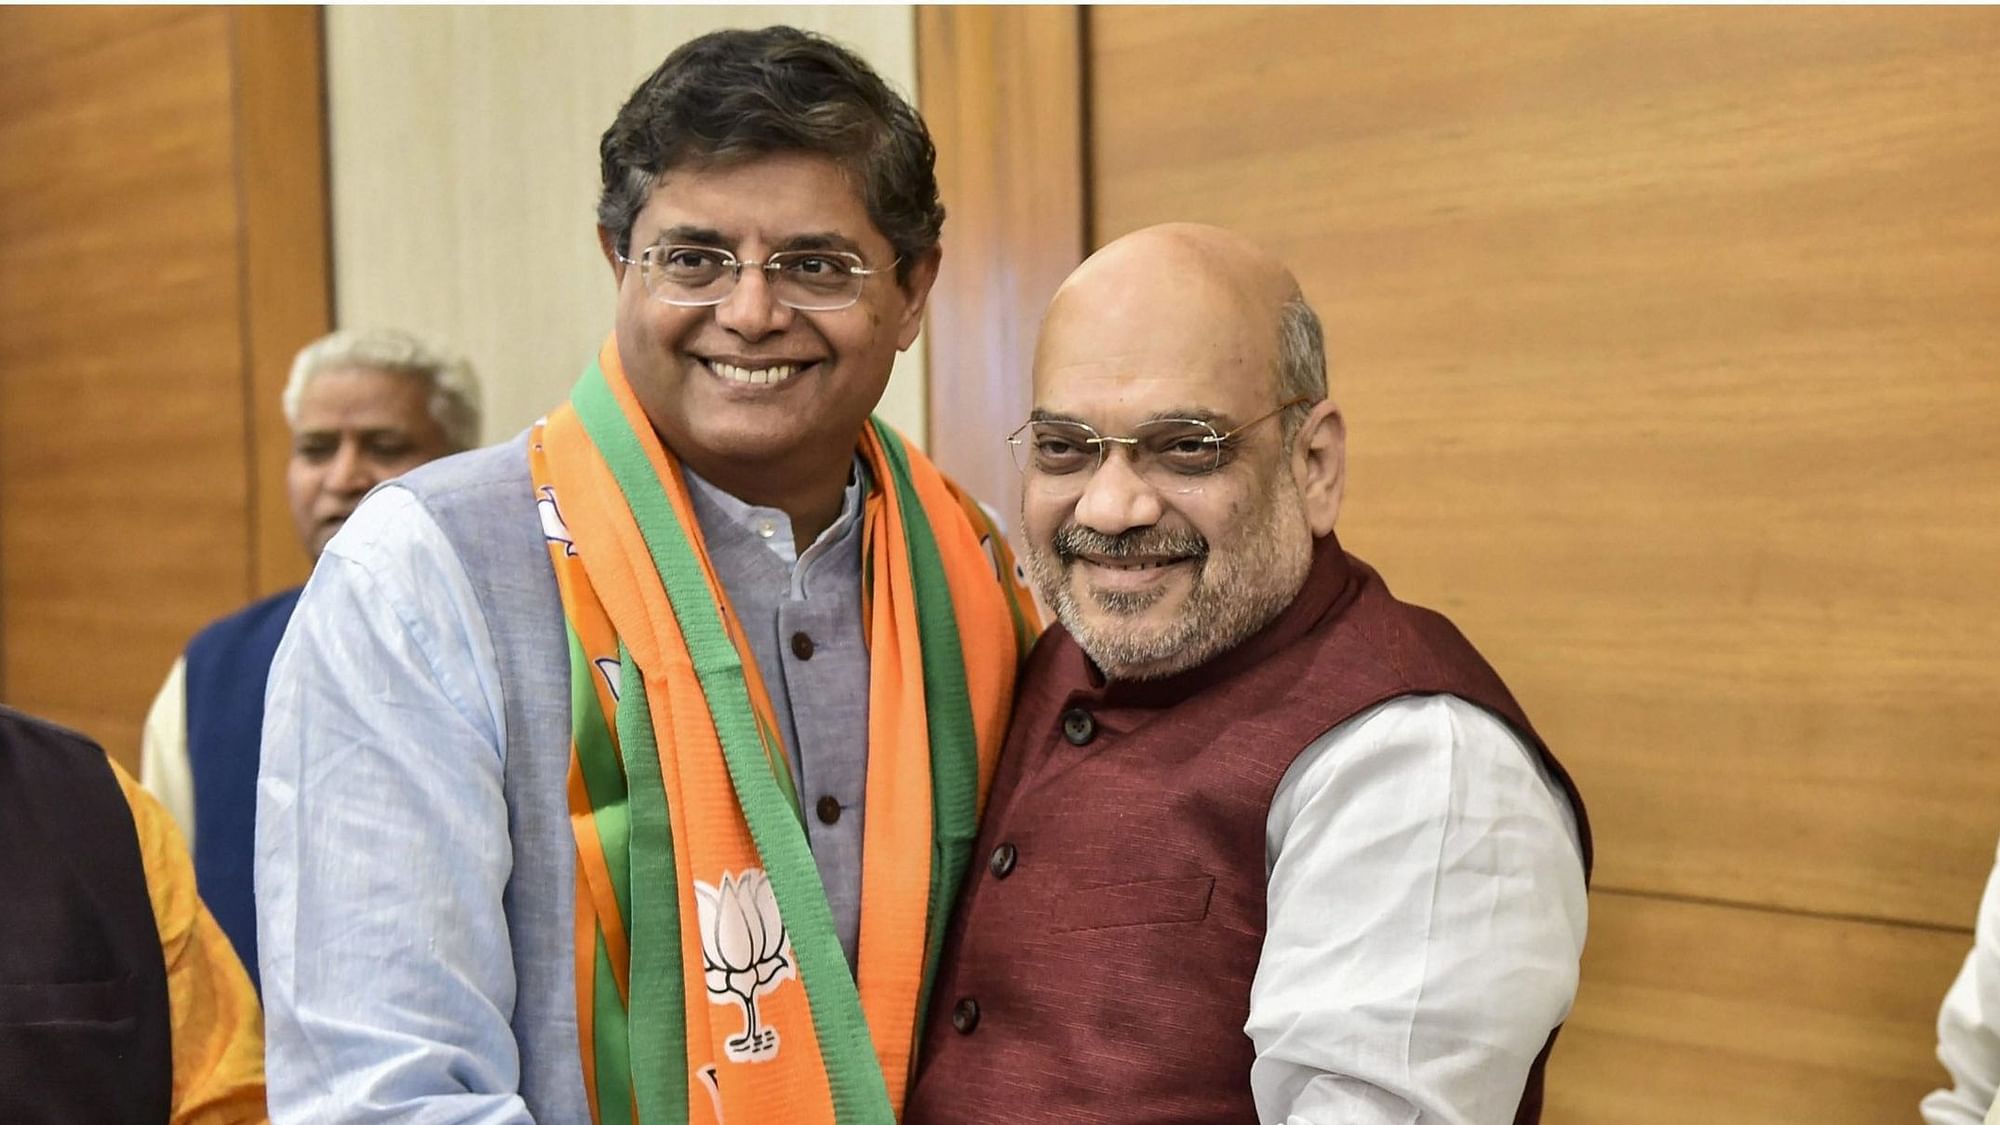 Odisha leader Baijayant Jay Panda, who joined the BJP last week, was appointed the party’s vice president and spokesperson.